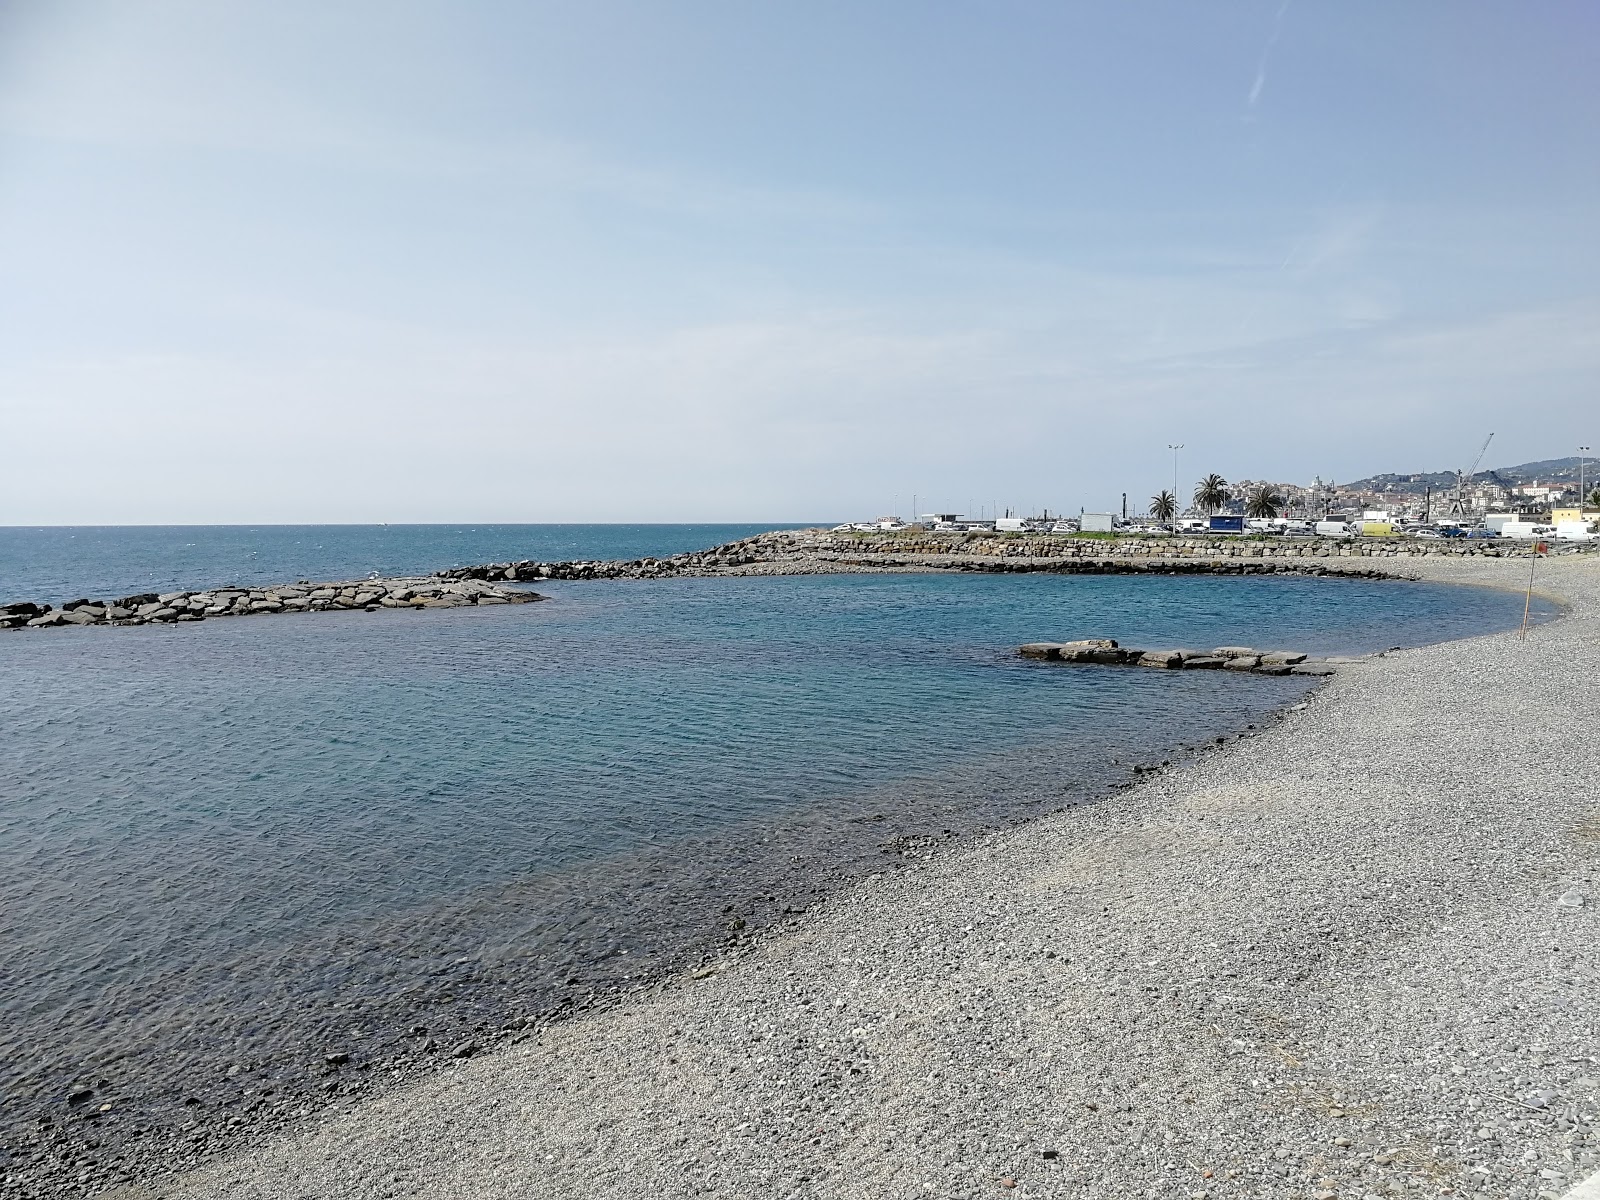 Photo of Spiaggia Sogni d'estate with gray fine pebble surface